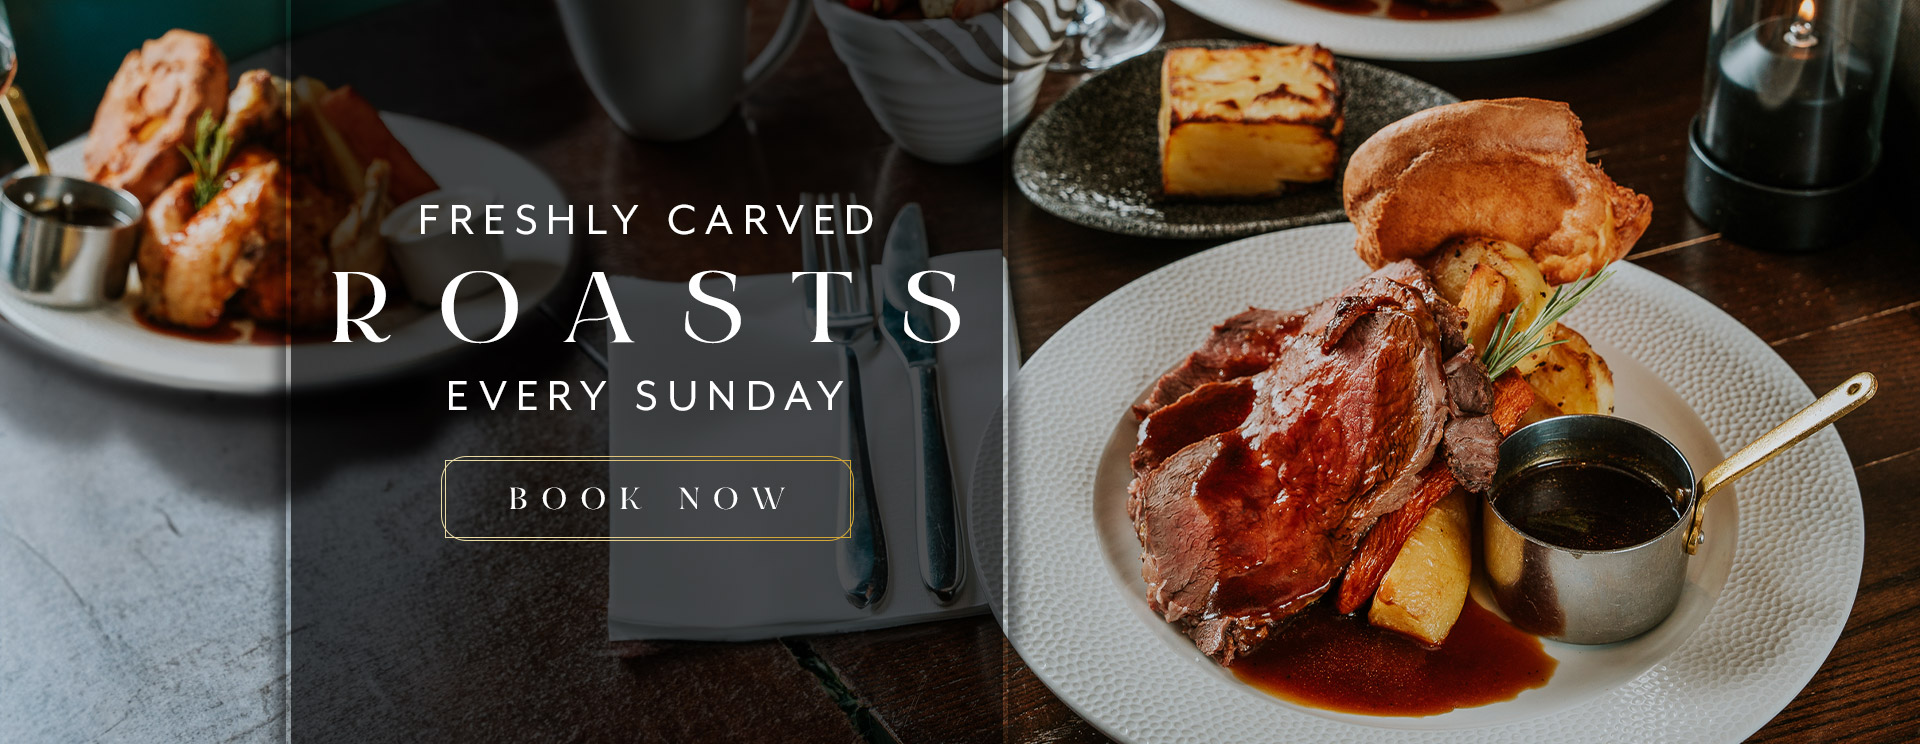 Sunday Lunch at The Wavendon Arms